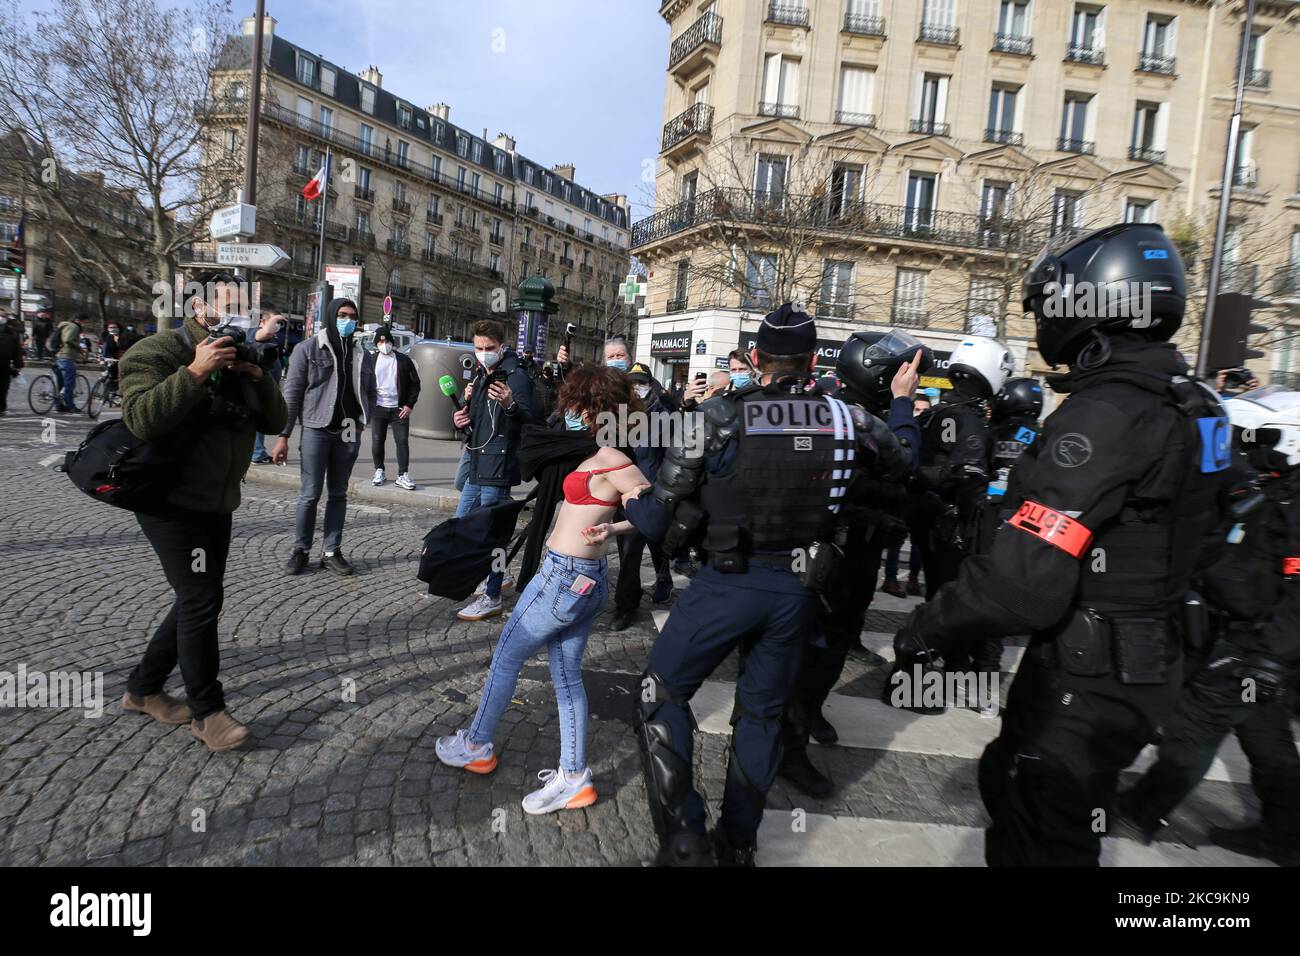 Policemen push off an « anti-fascist » counterprotest, during a demonstration against the far right Generation Identitaire group's potential dissolution in Place Denfert Rochereau, in Paris on February 20, 2021. The dissolution of Generation identitaire was evoked for the first time on January 26, 2021 by Interior Minister, as a reaction to the group's recent anti-migrant operation in the Pyrenees, which led to a preliminary investigation for provocation to racial hatred. (Photo by Michel Stoupak/NurPhoto) Stock Photo